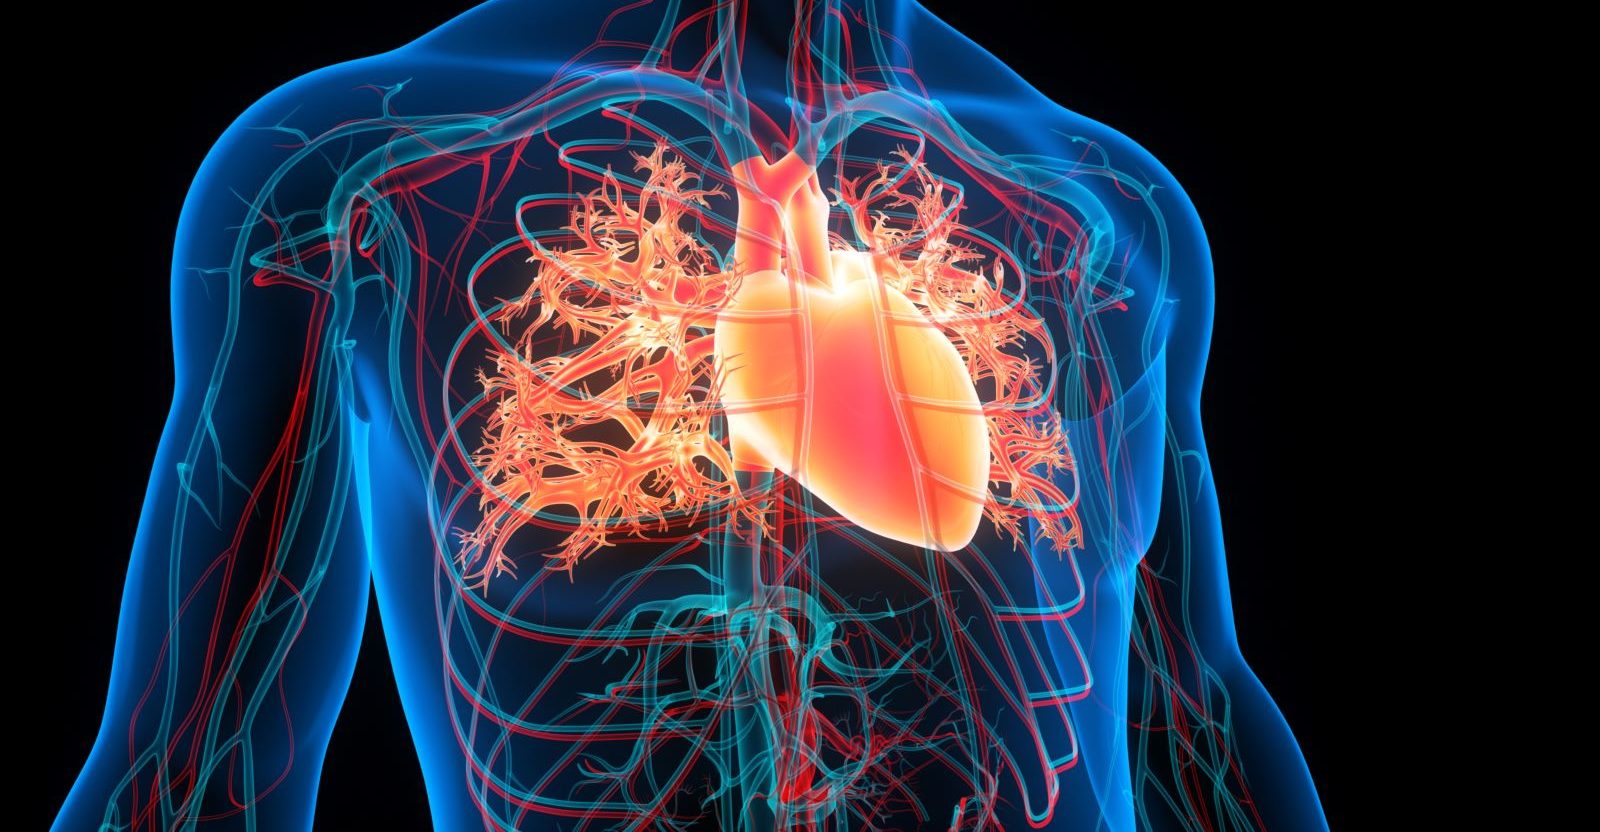 Coronary artery disease is considered the most common type of heart disease. This deadly condition takes a life every 34 seconds.